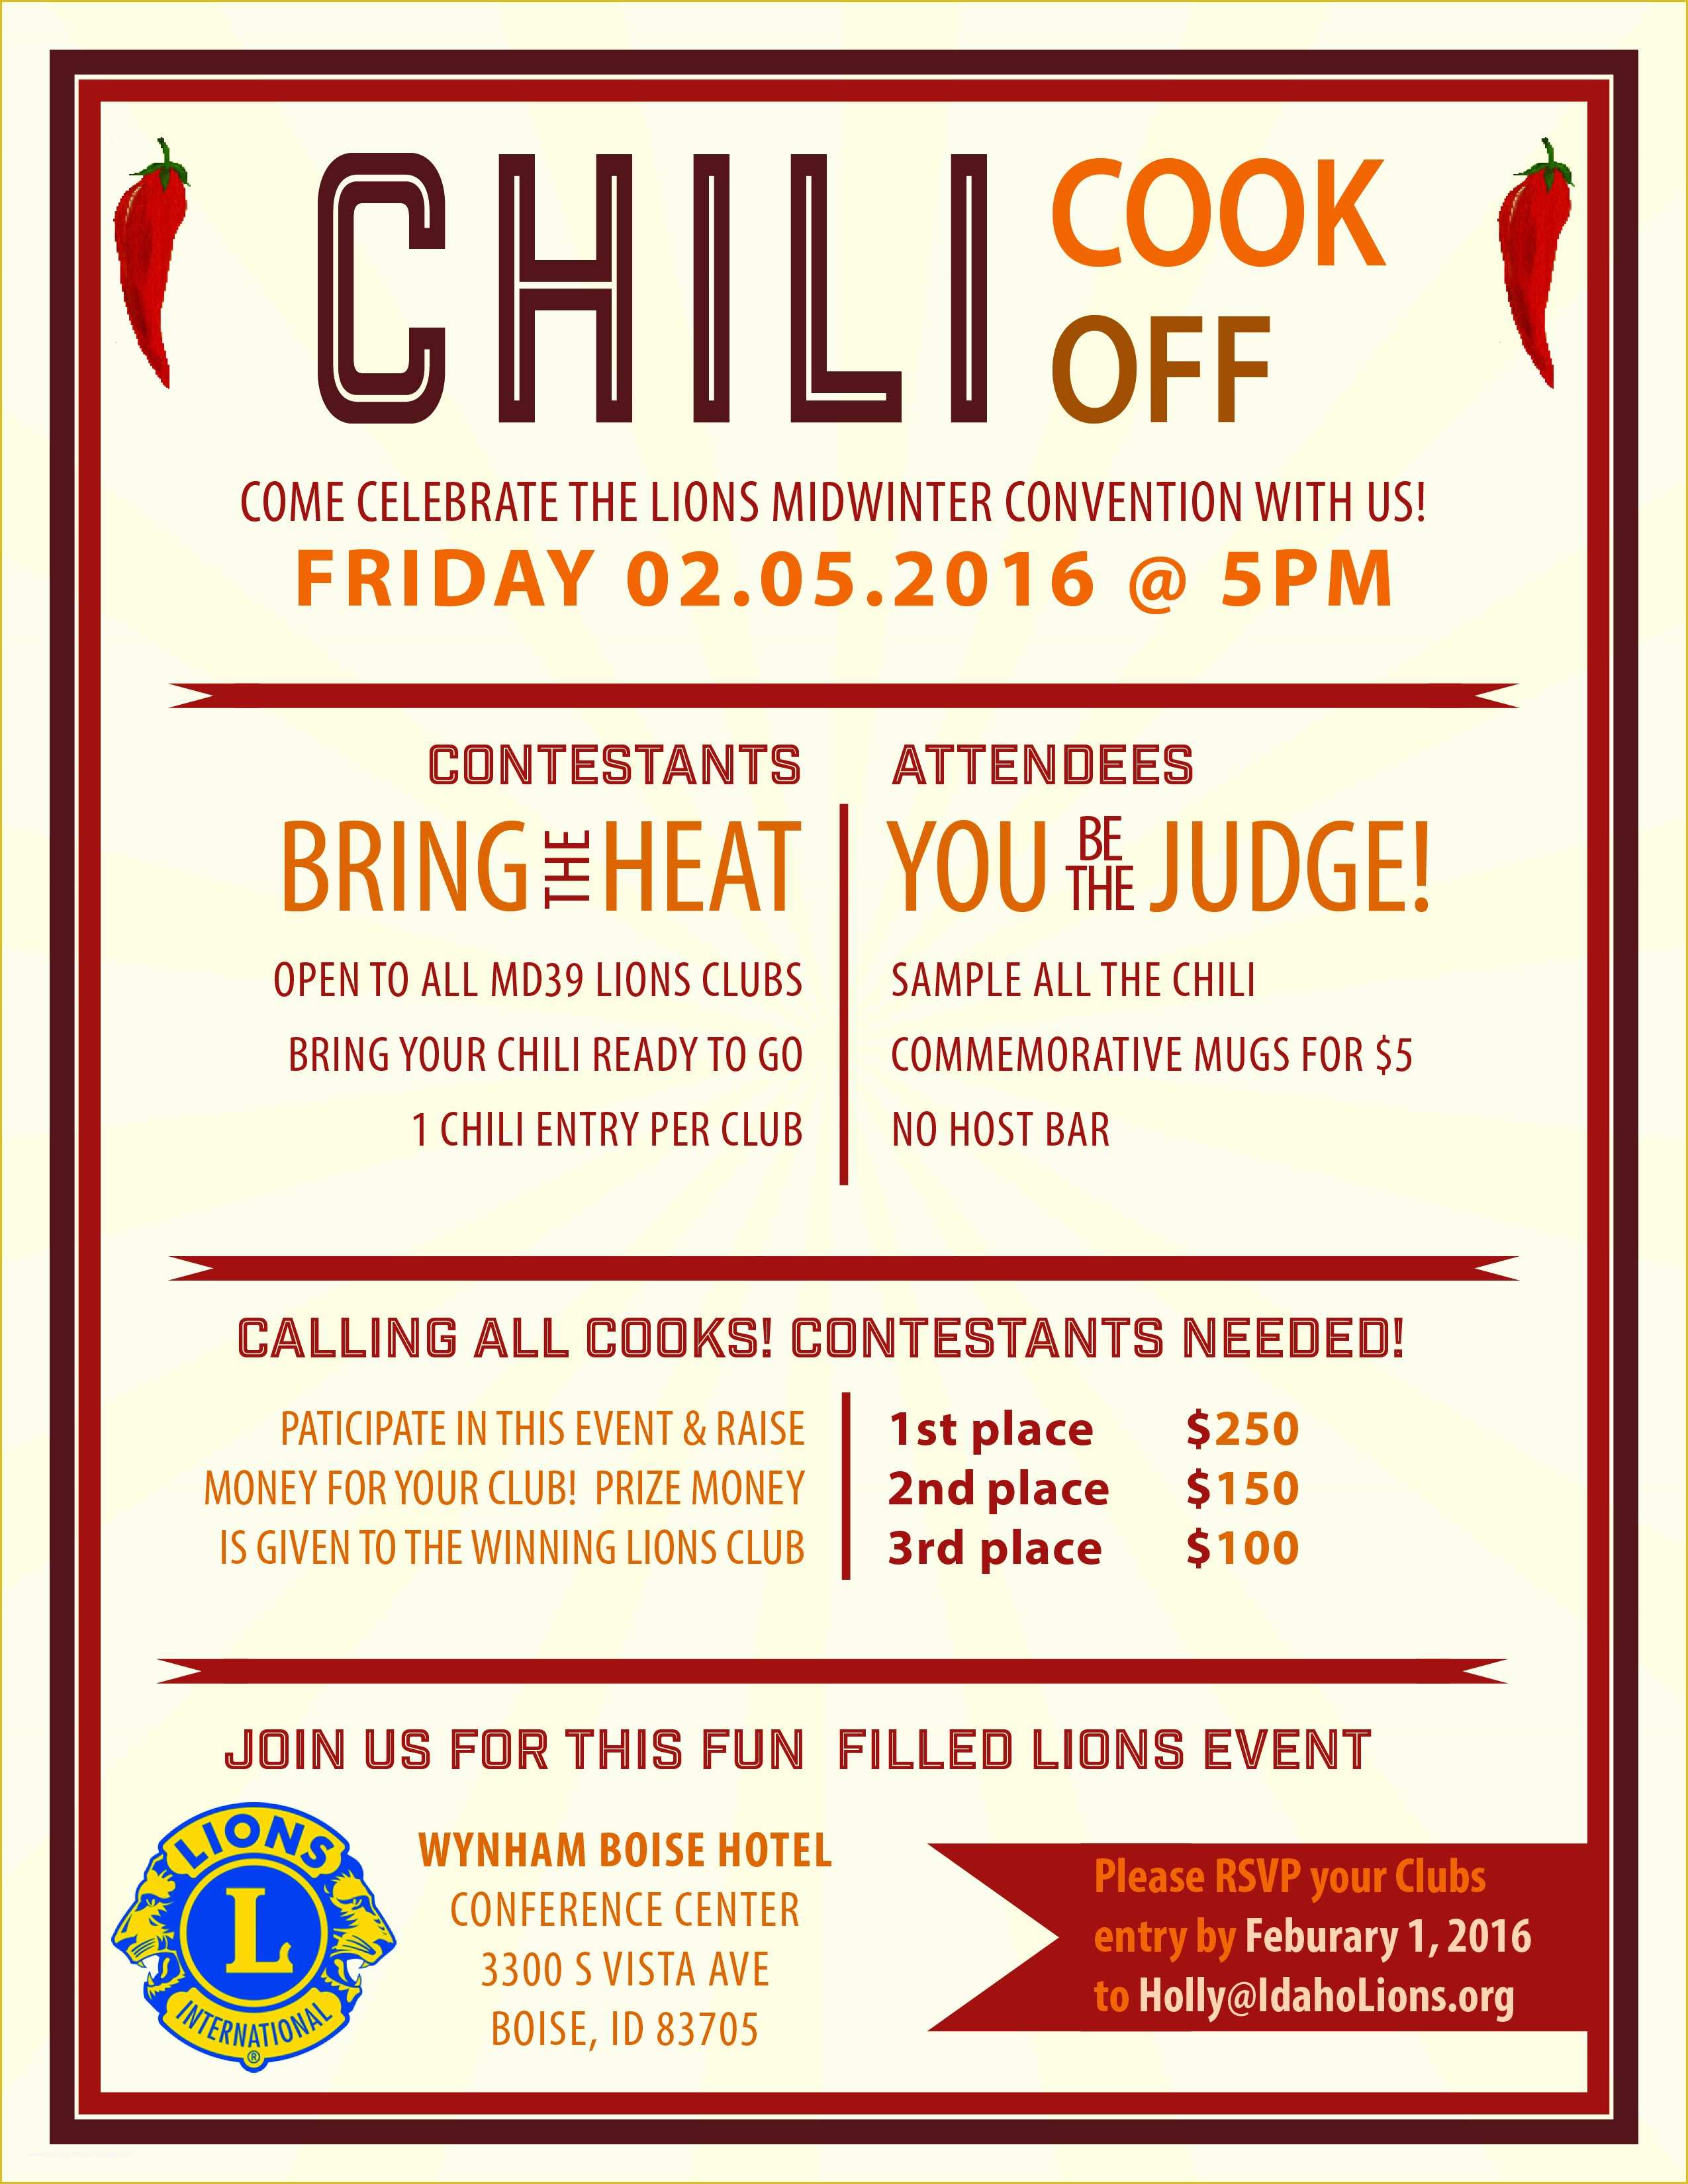 chili-cook-off-flyer-template-free-of-chili-cook-f-flyer-template-free-printable-wow